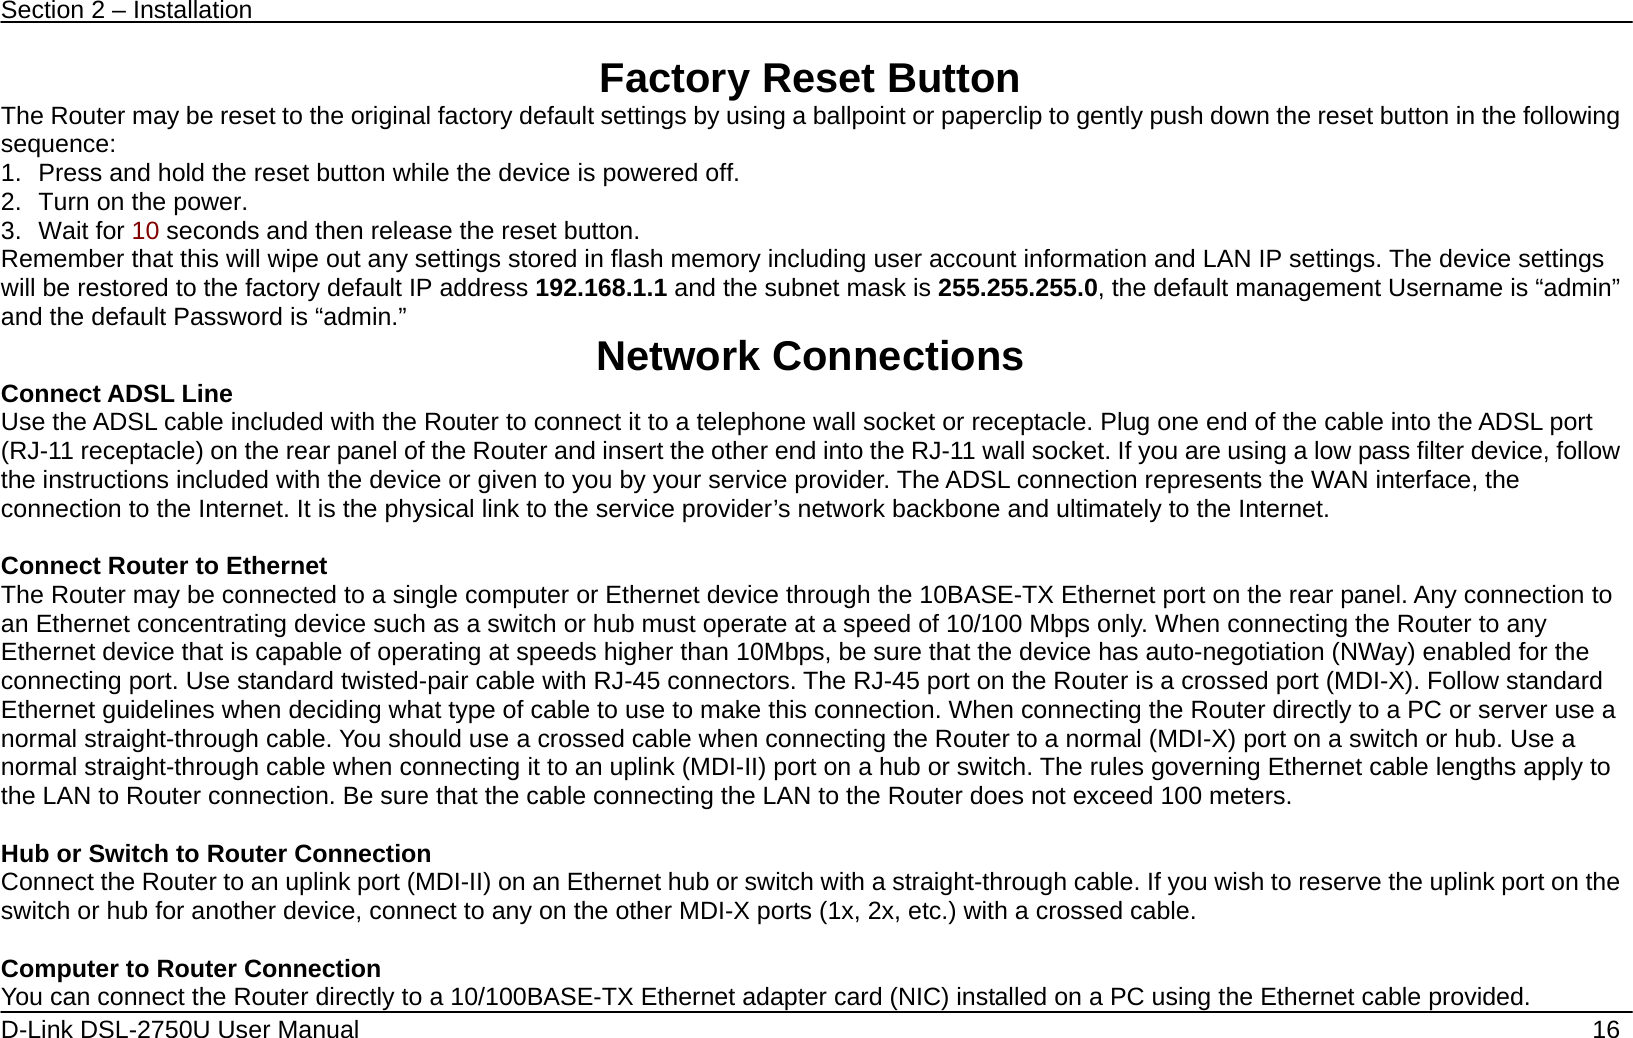 Section 2 – Installation   D-Link DSL-2750U User Manual    16 Factory Reset Button The Router may be reset to the original factory default settings by using a ballpoint or paperclip to gently push down the reset button in the following sequence:  1.  Press and hold the reset button while the device is powered off. 2.  Turn on the power. 3. Wait for 10 seconds and then release the reset button.   Remember that this will wipe out any settings stored in flash memory including user account information and LAN IP settings. The device settings will be restored to the factory default IP address 192.168.1.1 and the subnet mask is 255.255.255.0, the default management Username is “admin” and the default Password is “admin.”  Network Connections   Connect ADSL Line Use the ADSL cable included with the Router to connect it to a telephone wall socket or receptacle. Plug one end of the cable into the ADSL port (RJ-11 receptacle) on the rear panel of the Router and insert the other end into the RJ-11 wall socket. If you are using a low pass filter device, follow the instructions included with the device or given to you by your service provider. The ADSL connection represents the WAN interface, the connection to the Internet. It is the physical link to the service provider’s network backbone and ultimately to the Internet.    Connect Router to Ethernet   The Router may be connected to a single computer or Ethernet device through the 10BASE-TX Ethernet port on the rear panel. Any connection to an Ethernet concentrating device such as a switch or hub must operate at a speed of 10/100 Mbps only. When connecting the Router to any Ethernet device that is capable of operating at speeds higher than 10Mbps, be sure that the device has auto-negotiation (NWay) enabled for the connecting port. Use standard twisted-pair cable with RJ-45 connectors. The RJ-45 port on the Router is a crossed port (MDI-X). Follow standard Ethernet guidelines when deciding what type of cable to use to make this connection. When connecting the Router directly to a PC or server use a normal straight-through cable. You should use a crossed cable when connecting the Router to a normal (MDI-X) port on a switch or hub. Use a normal straight-through cable when connecting it to an uplink (MDI-II) port on a hub or switch. The rules governing Ethernet cable lengths apply to the LAN to Router connection. Be sure that the cable connecting the LAN to the Router does not exceed 100 meters.  Hub or Switch to Router Connection Connect the Router to an uplink port (MDI-II) on an Ethernet hub or switch with a straight-through cable. If you wish to reserve the uplink port on the switch or hub for another device, connect to any on the other MDI-X ports (1x, 2x, etc.) with a crossed cable.  Computer to Router Connection You can connect the Router directly to a 10/100BASE-TX Ethernet adapter card (NIC) installed on a PC using the Ethernet cable provided.